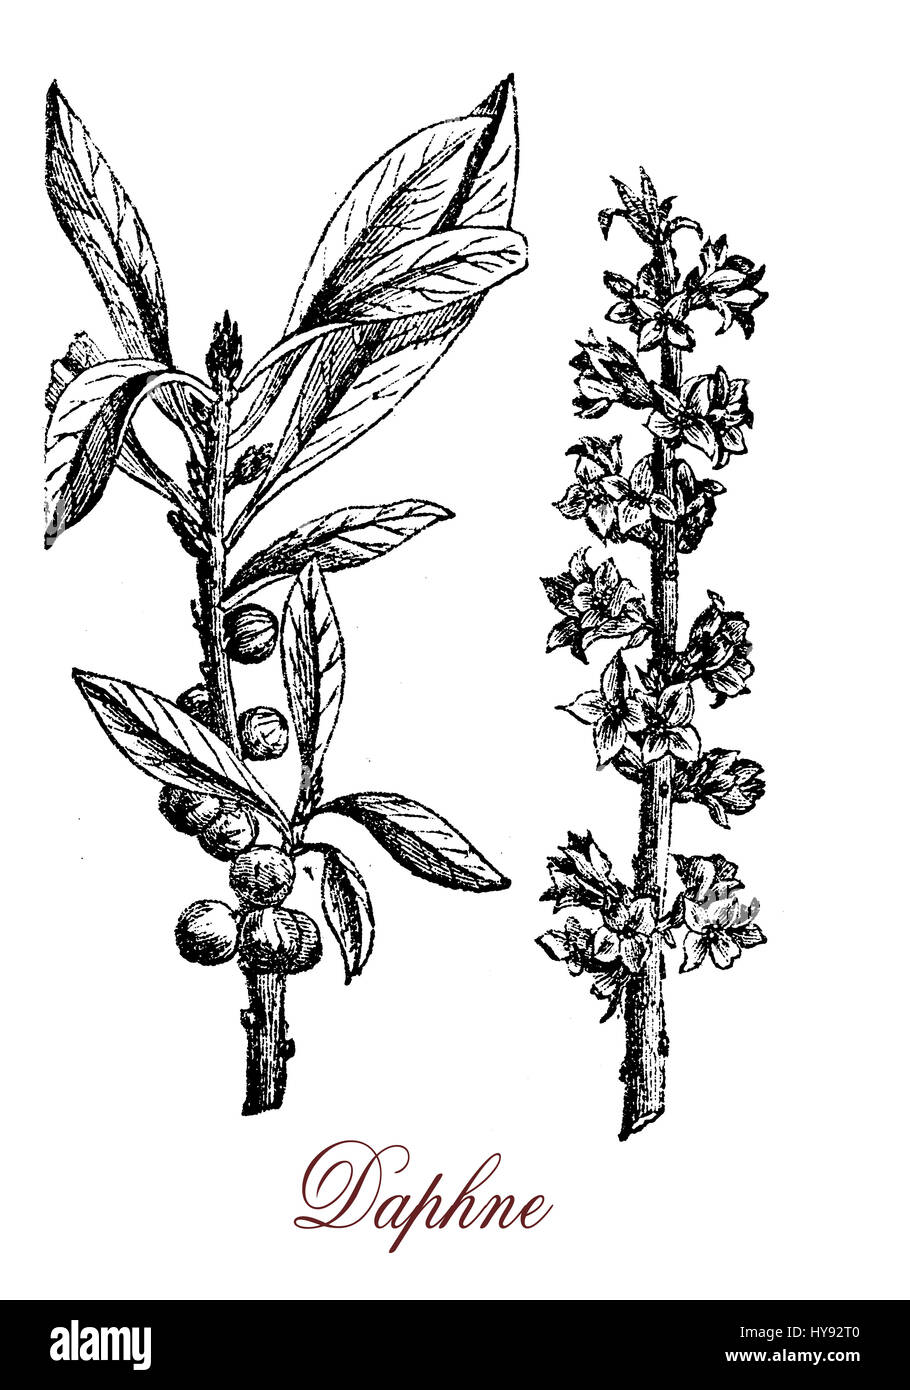 Vintage engraving of Daphne, ornamental shrub cultivated in garden with scented flowers and poisonous berries. Stock Photo